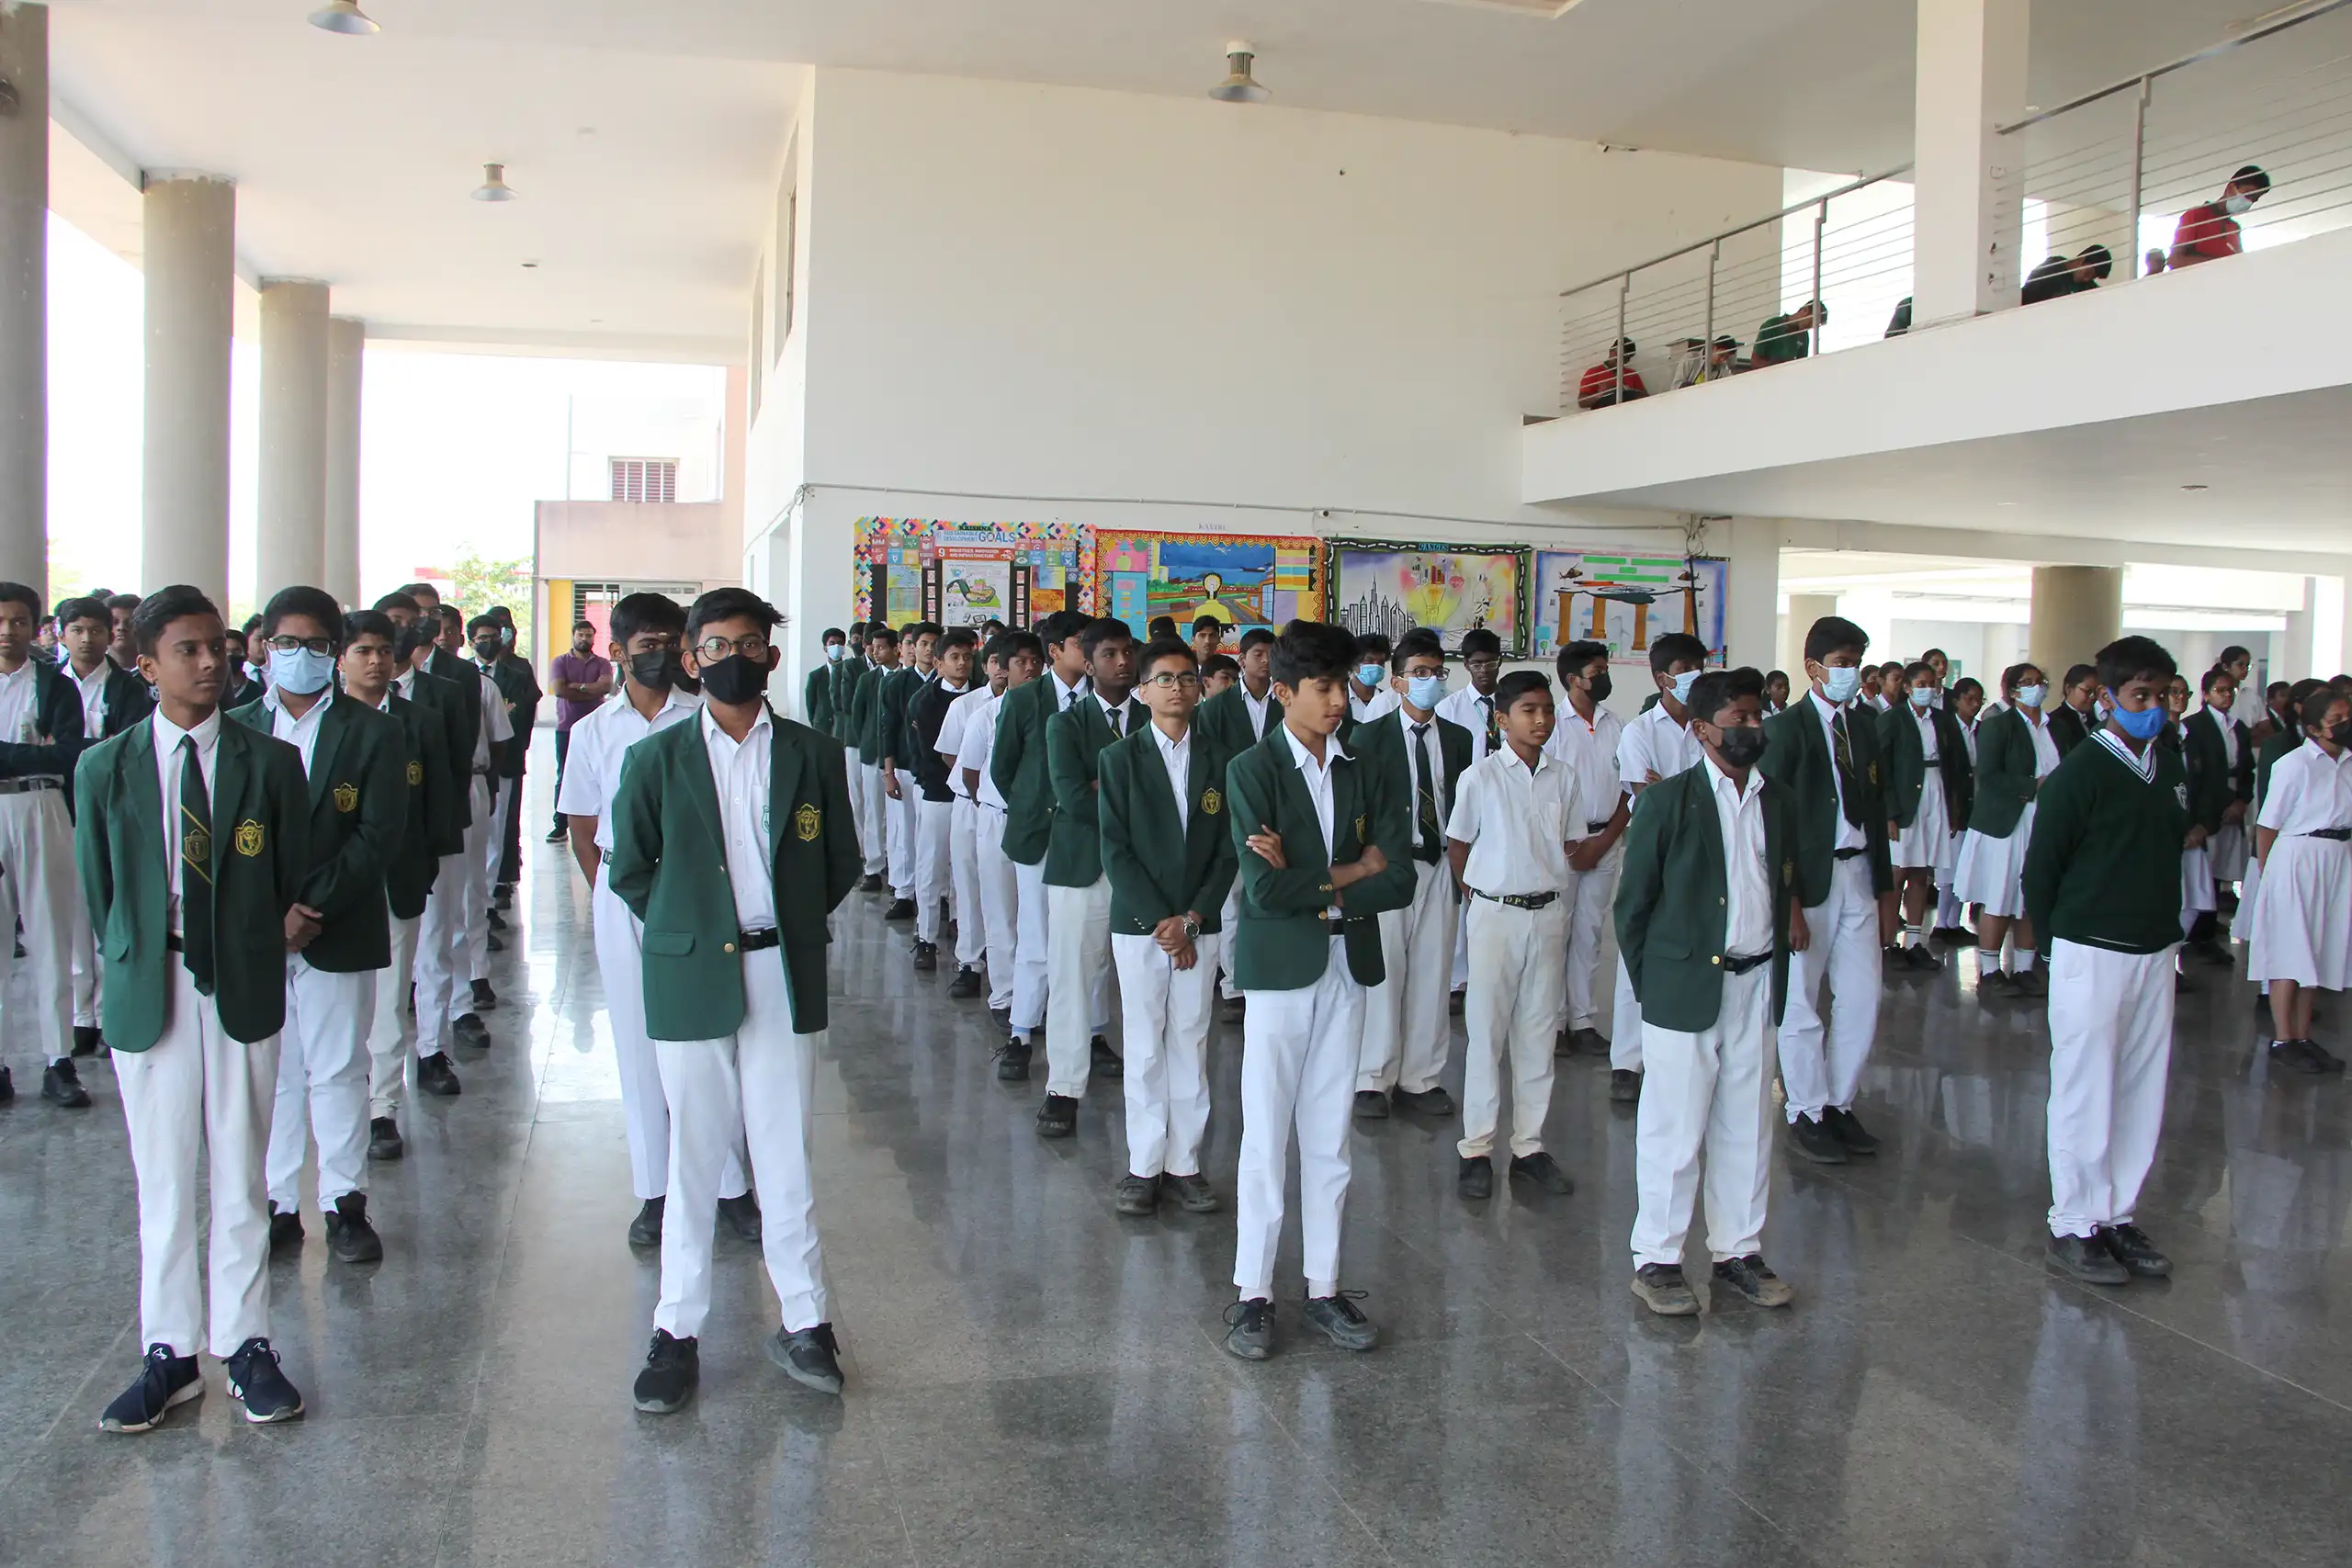 Students of DPS Warangal gathered in activity hall for national constitution day celebration.